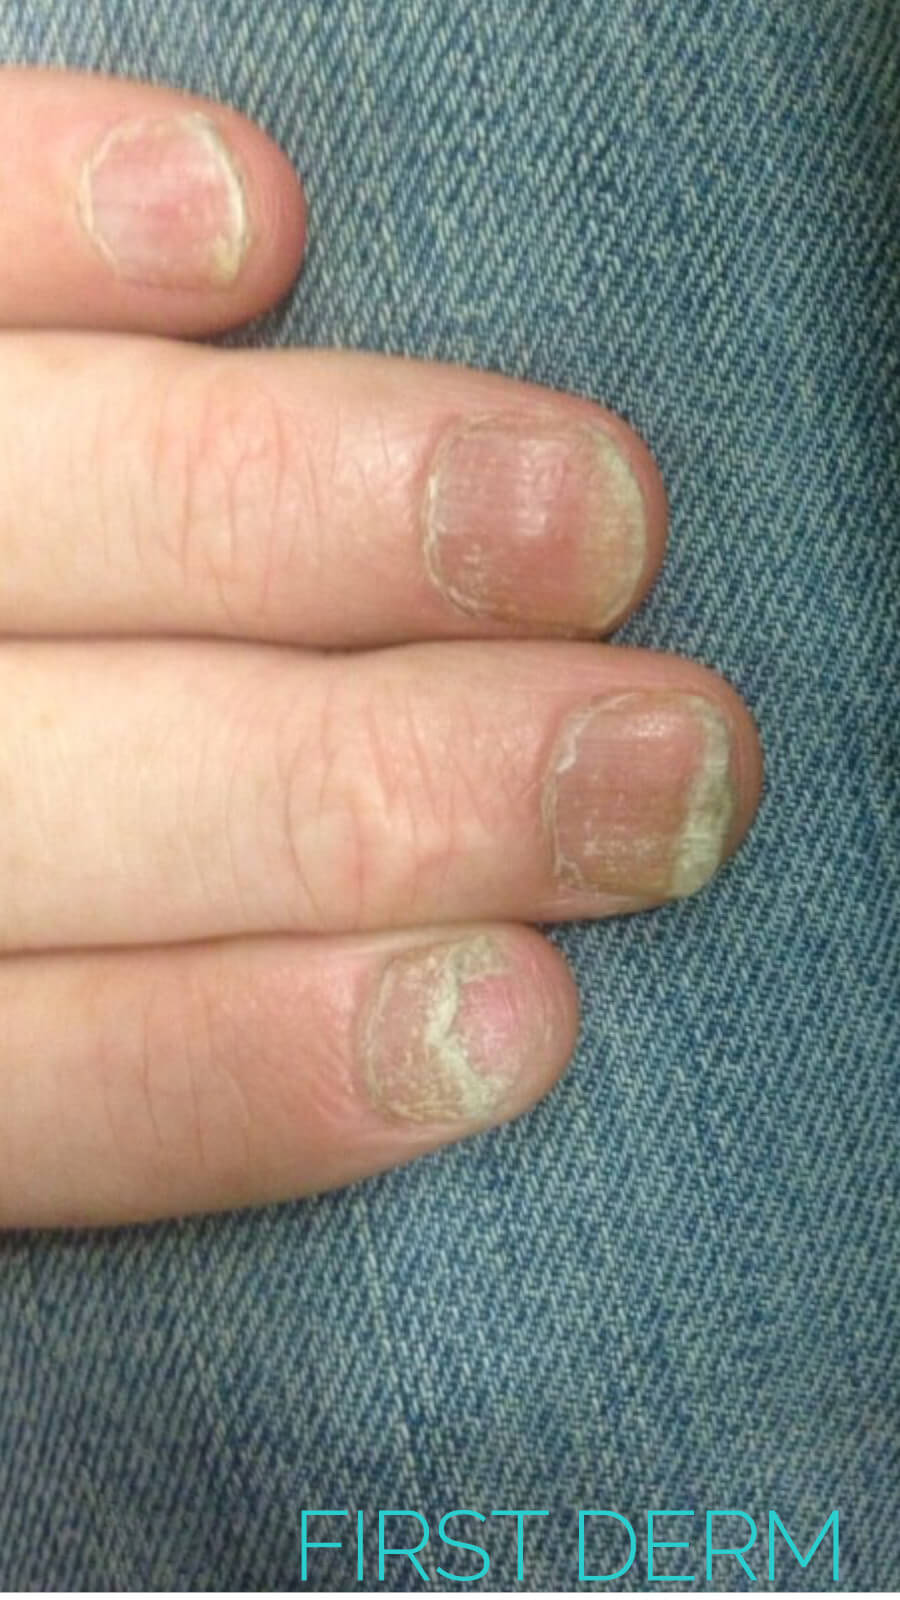 What it means if finger nails turn black and pain? - Quora